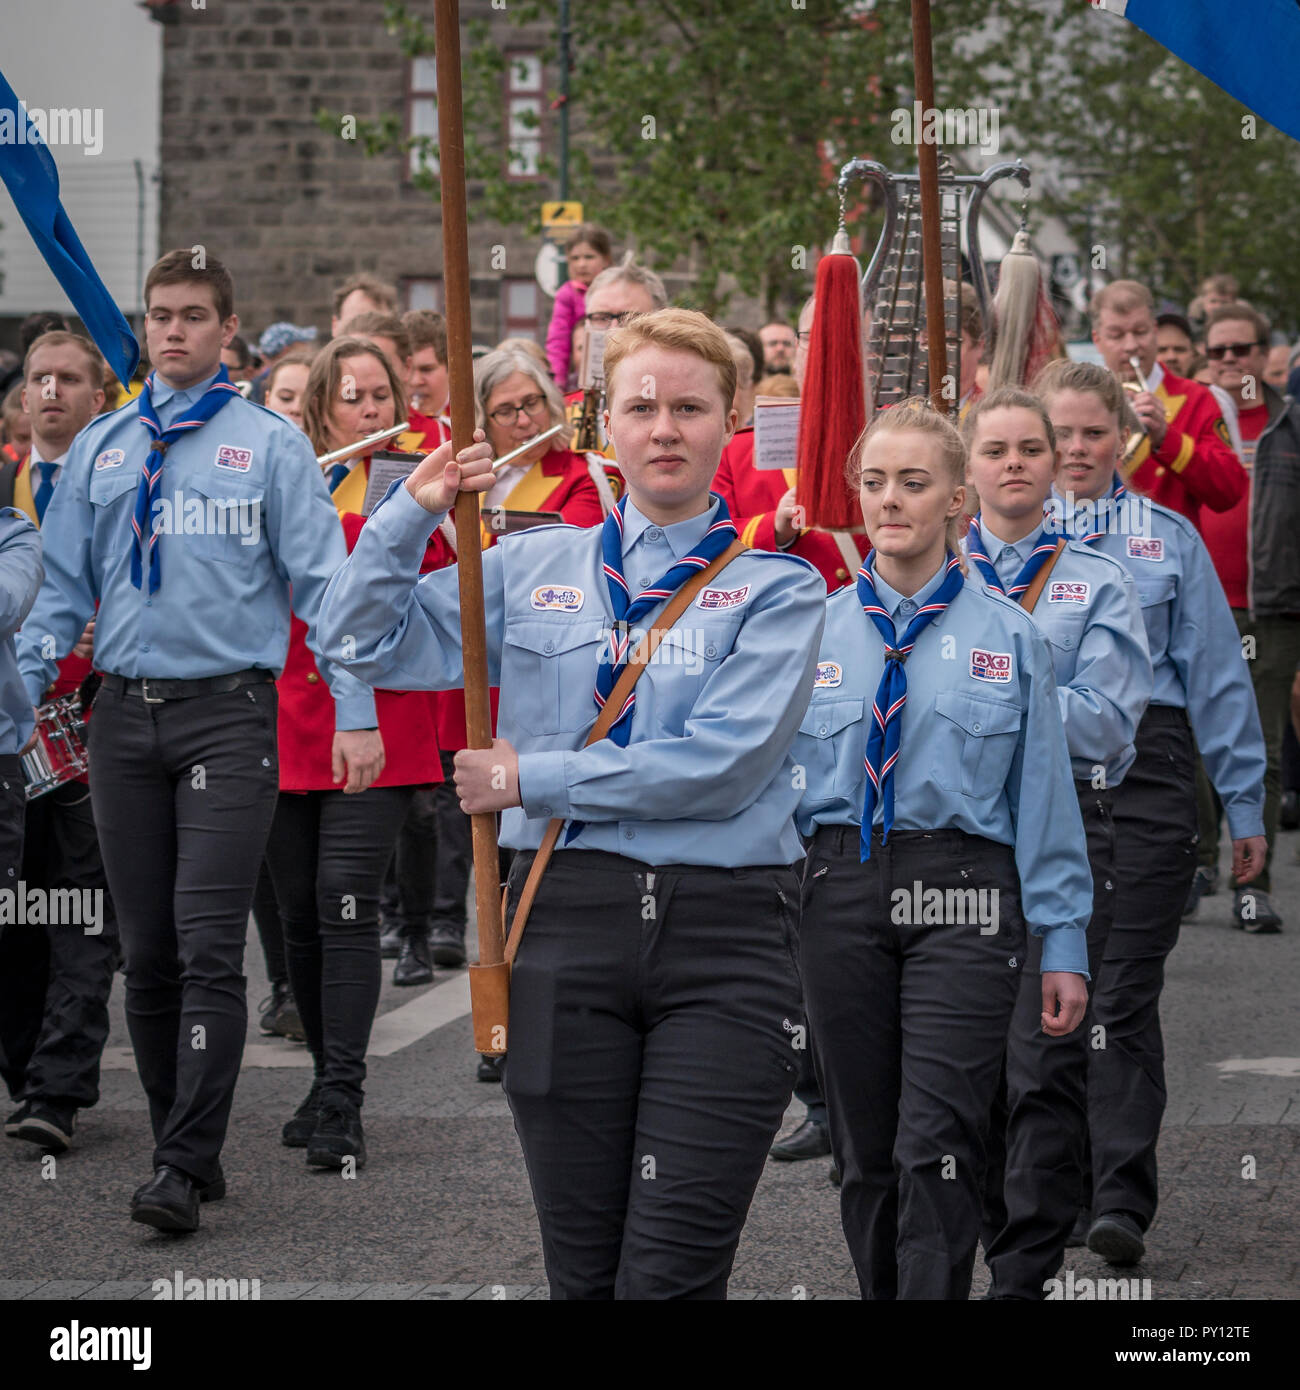 Iceland's Scouts taking part in the festivities of Independence day, June 17, Reykjavik, Iceland. Stock Photo